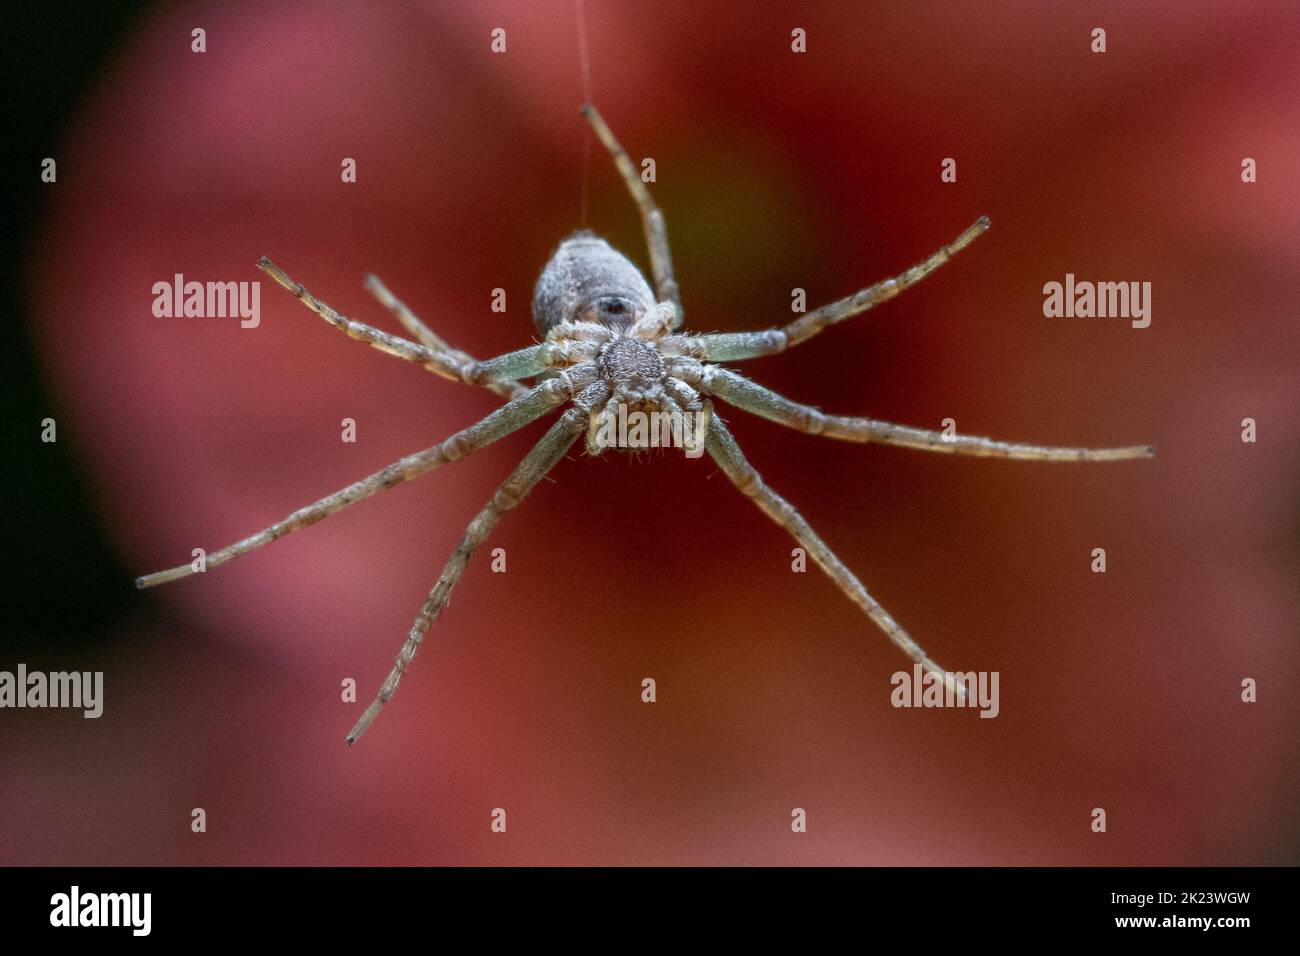 Running crab spider (Philodromidae) lowering itself on a thread past a flower, UK wildlife Stock Photo